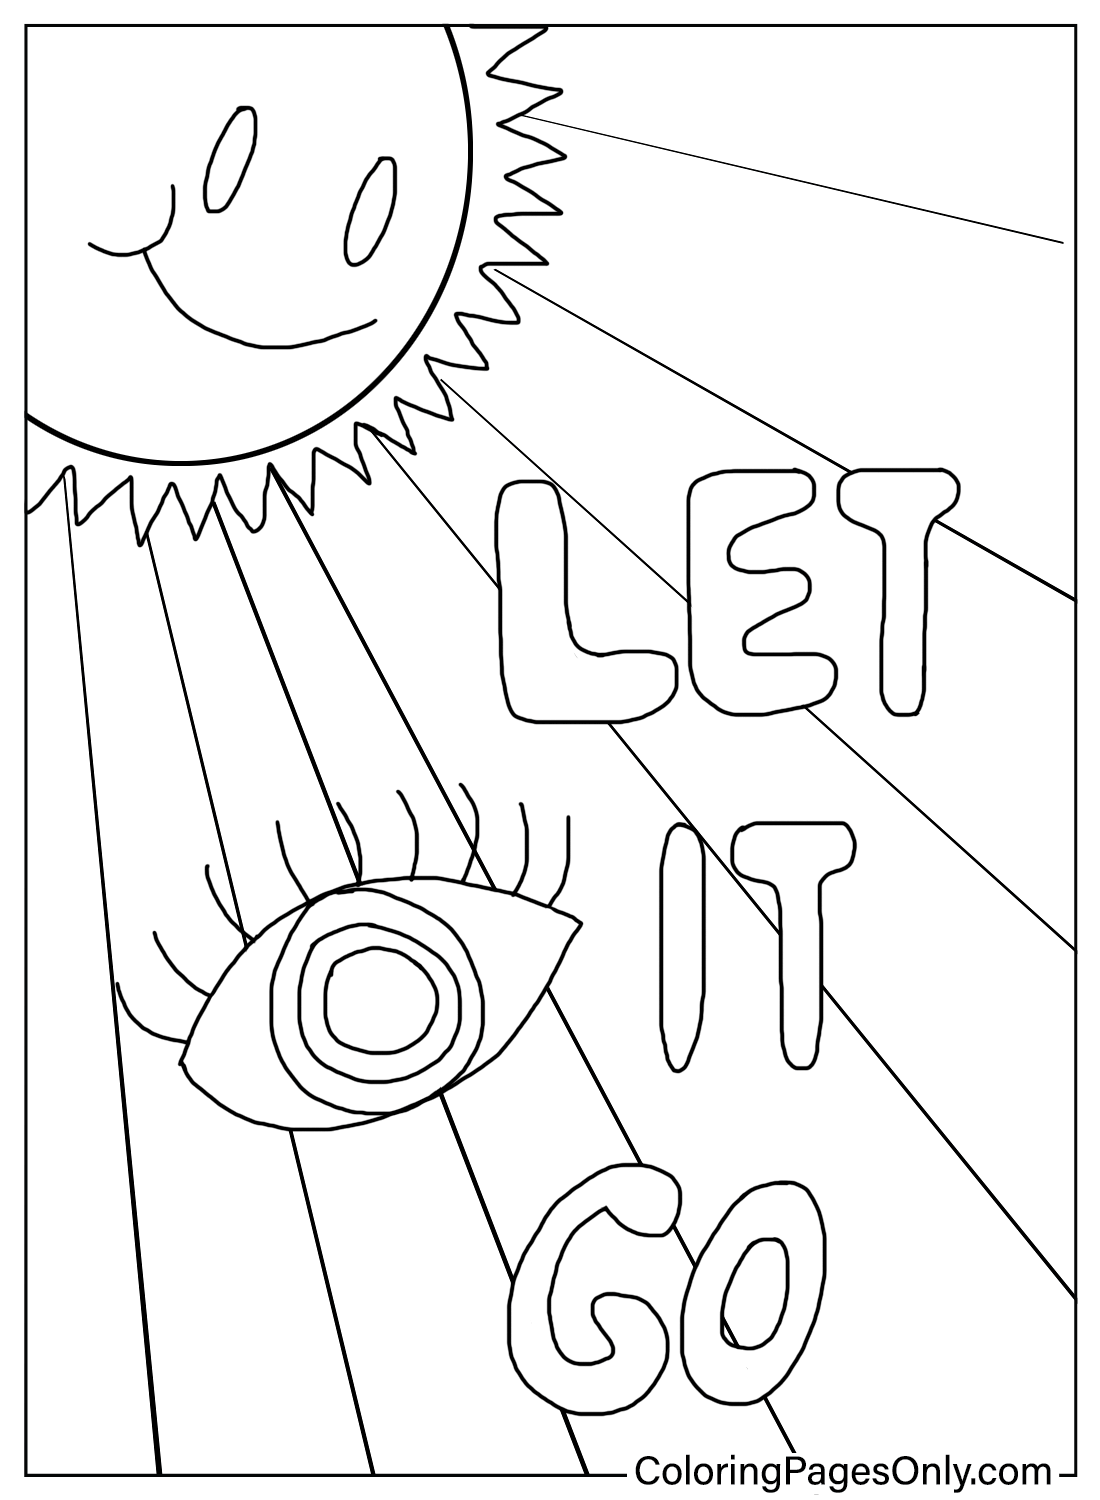 Coloring Page Hippie Let It Go from Hippie